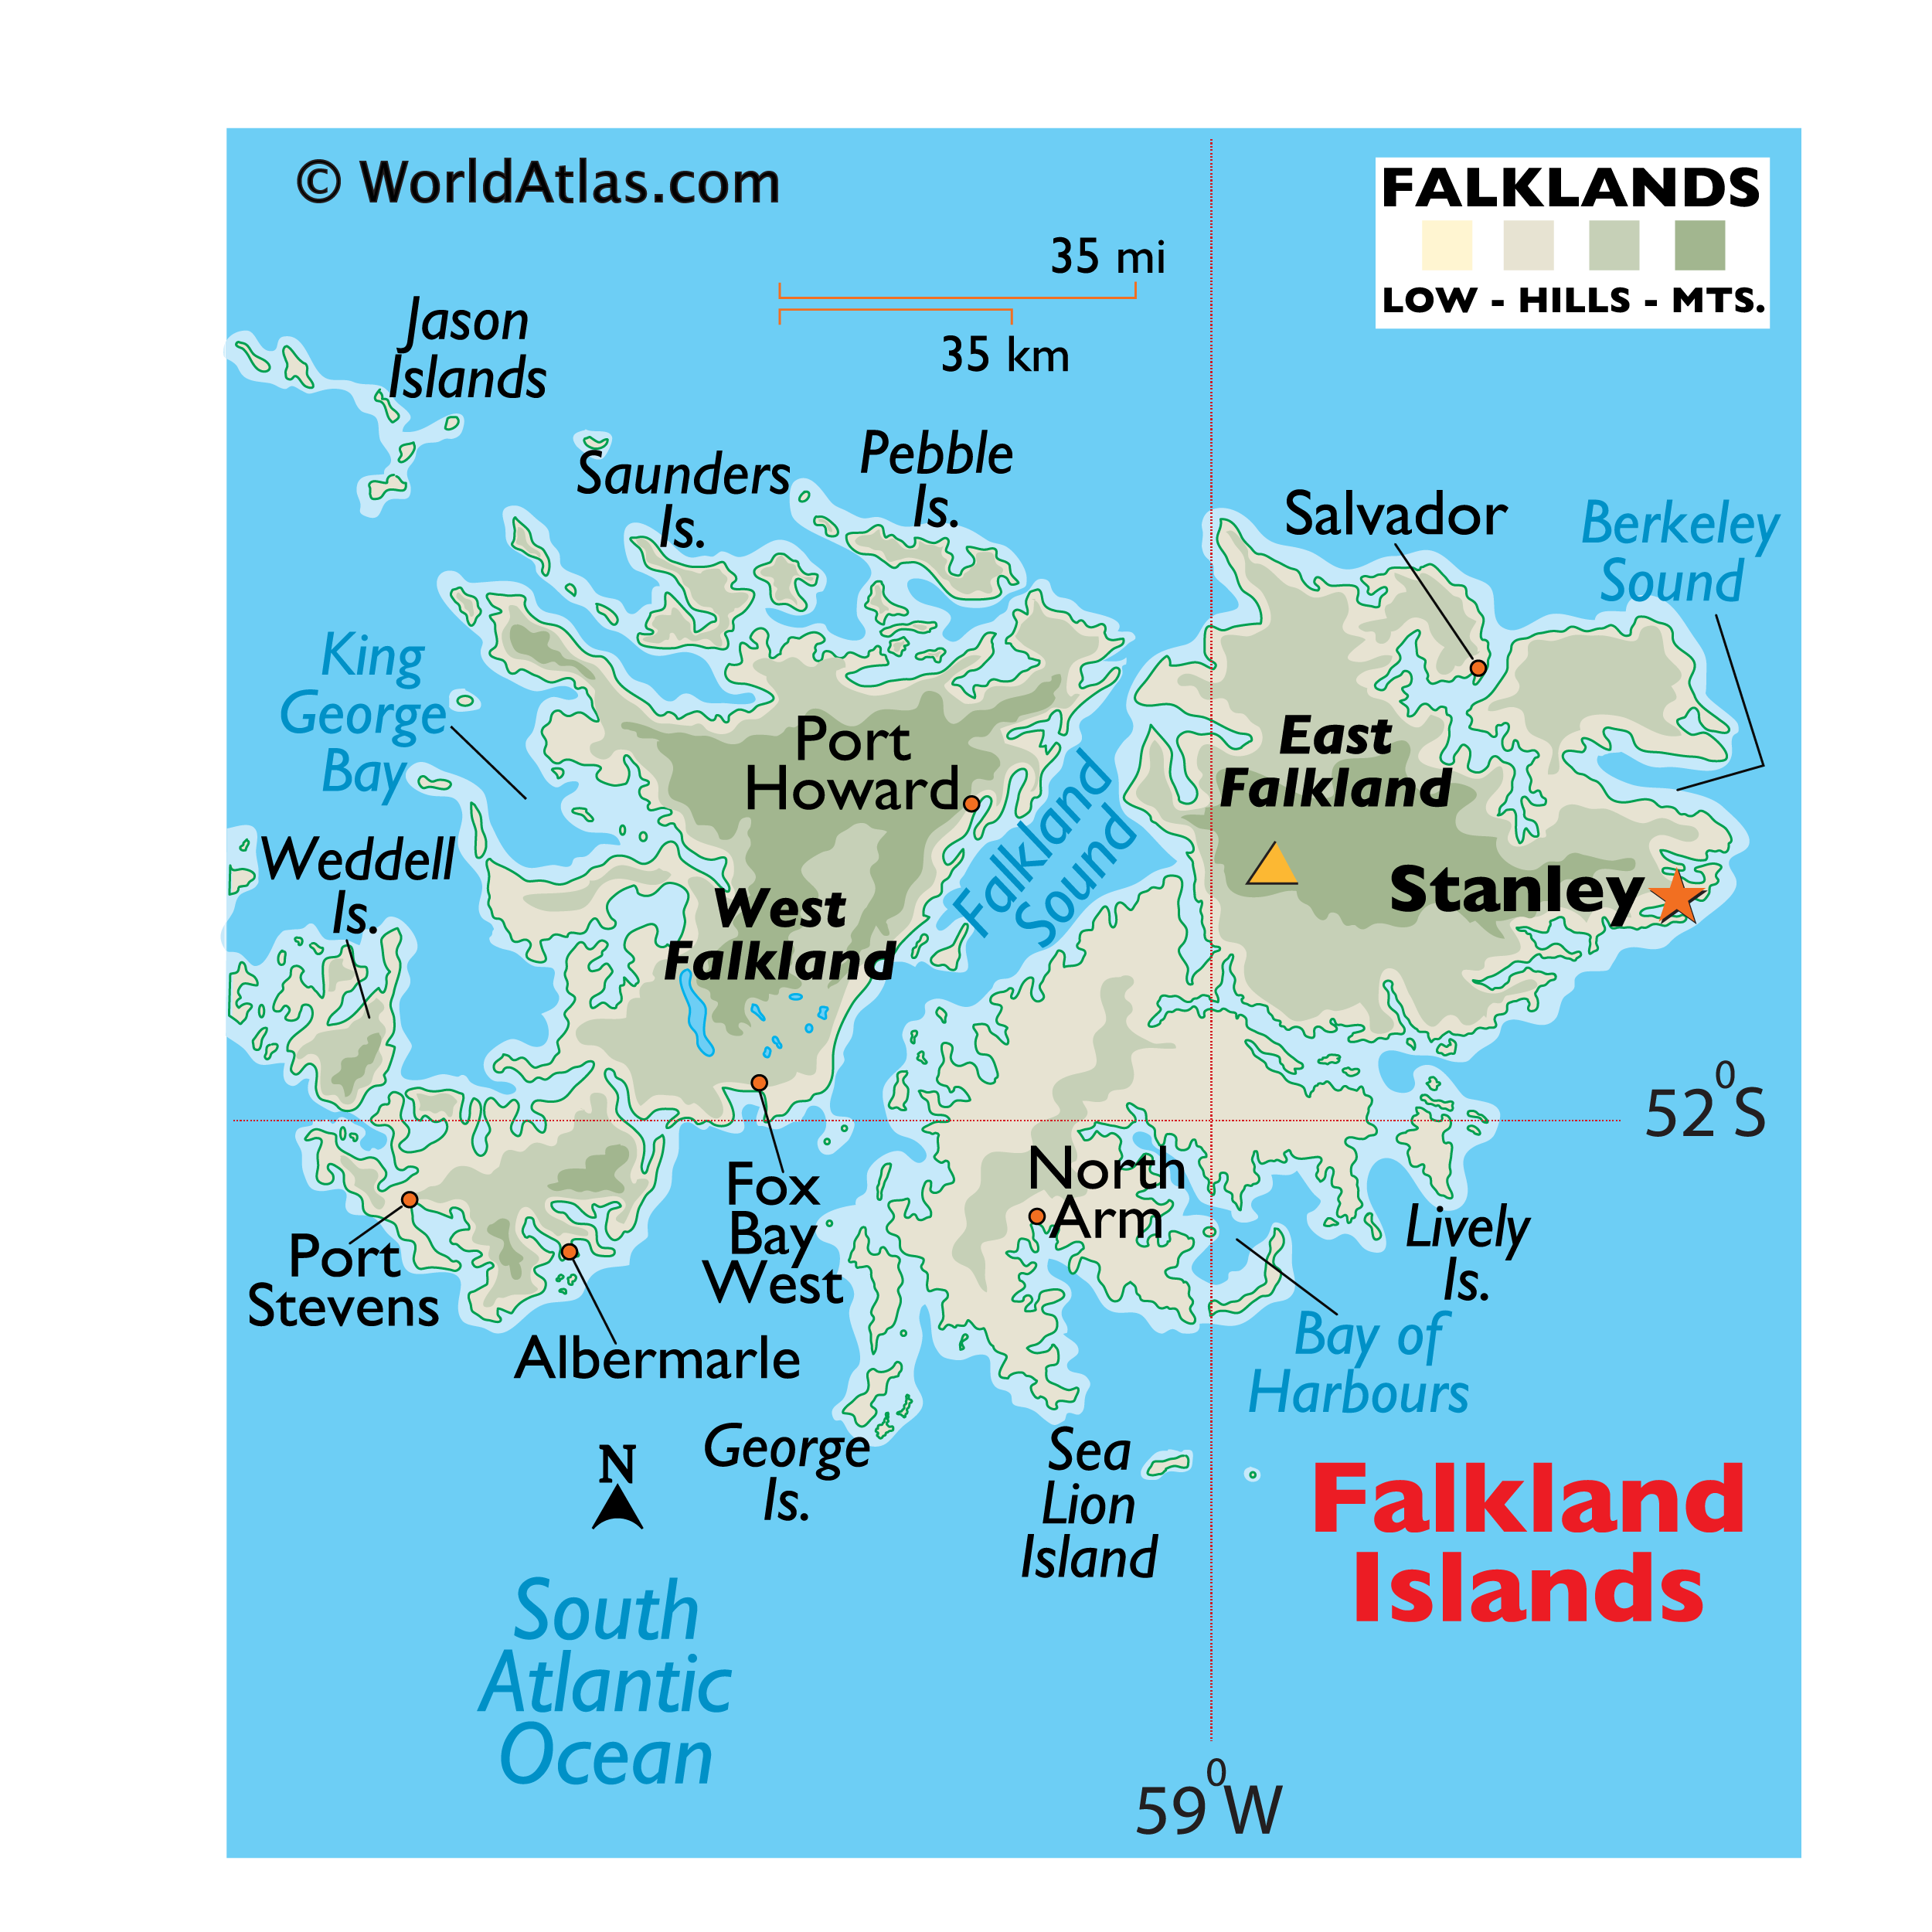 Falkland Islands Attractions, Travel and Vacation Suggestions ...